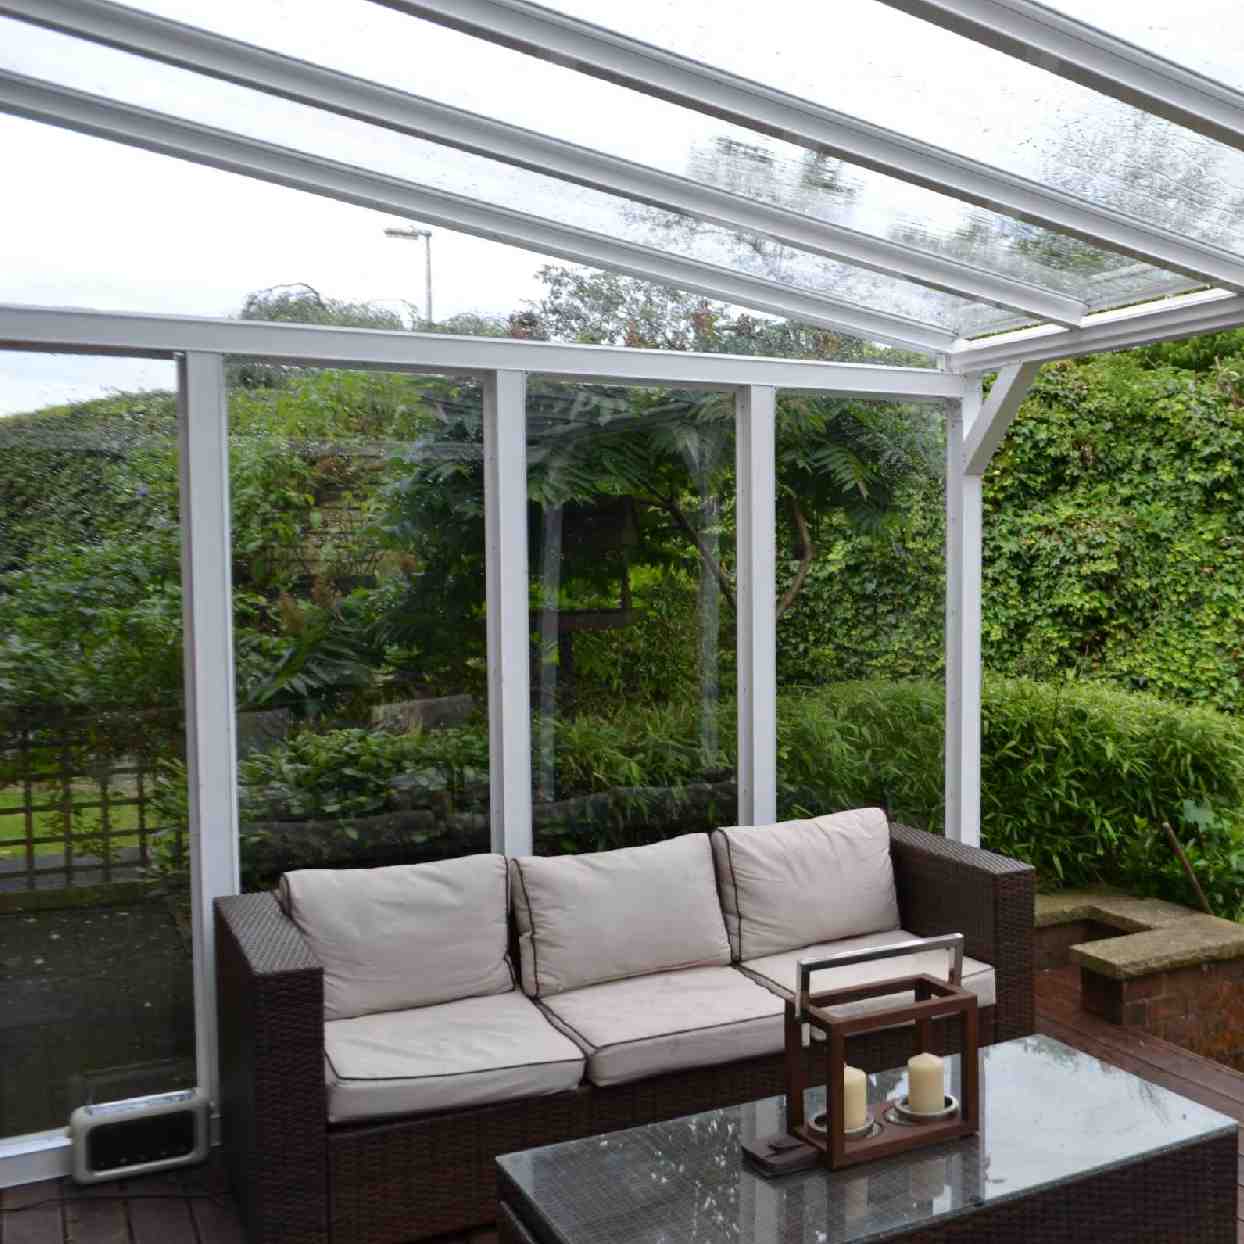 Buy Omega Verandah White with 16mm Polycarbonate Glazing - 5.2m (W) x 2.5m (P), (3) Supporting Posts online today